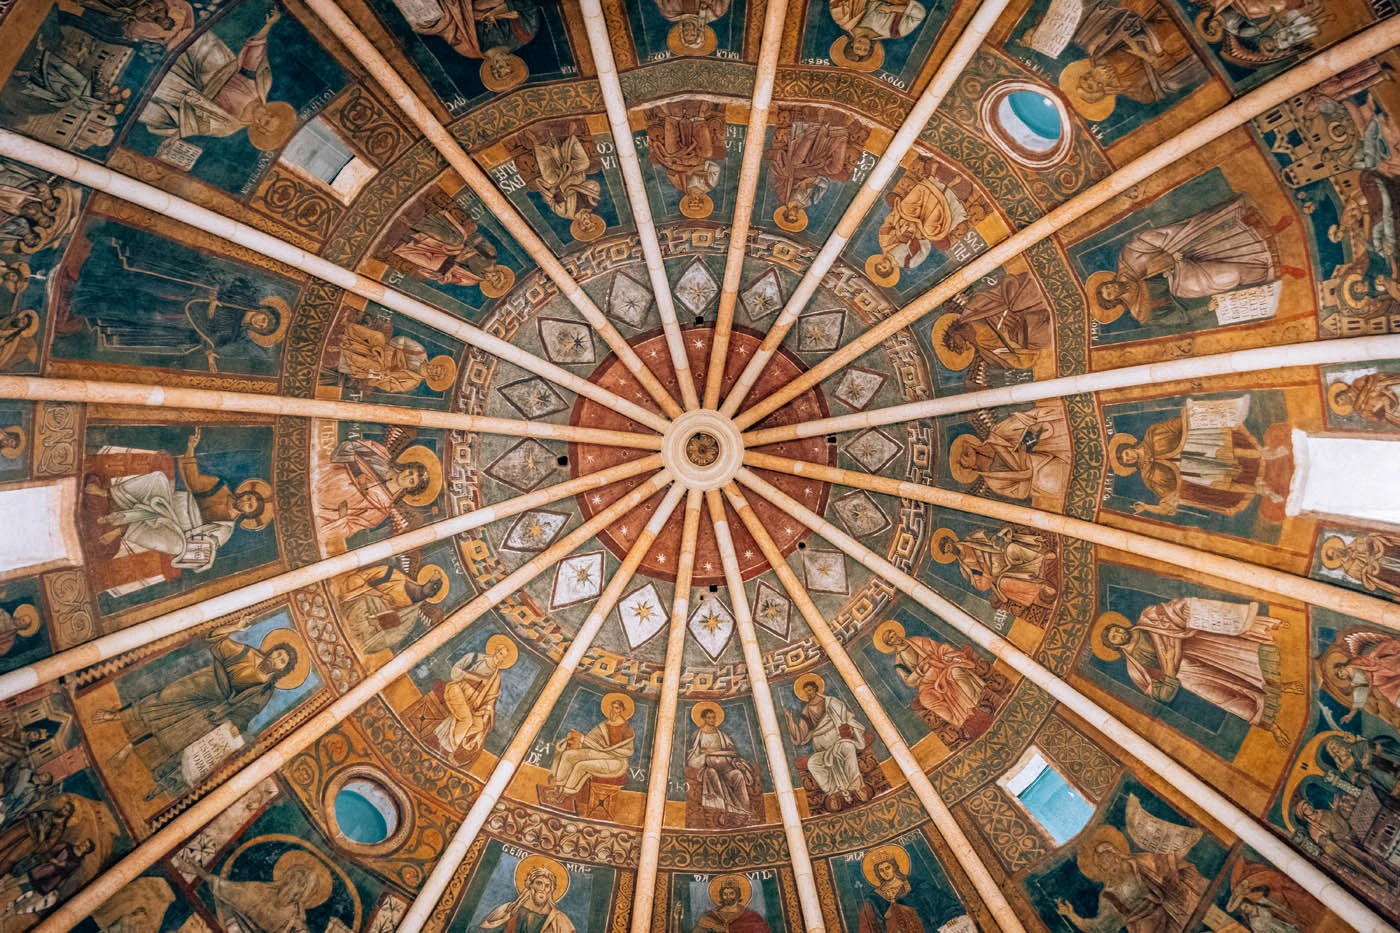 BEST Things to do in Parma Italy - Parma Baptistery - Painted ceiling